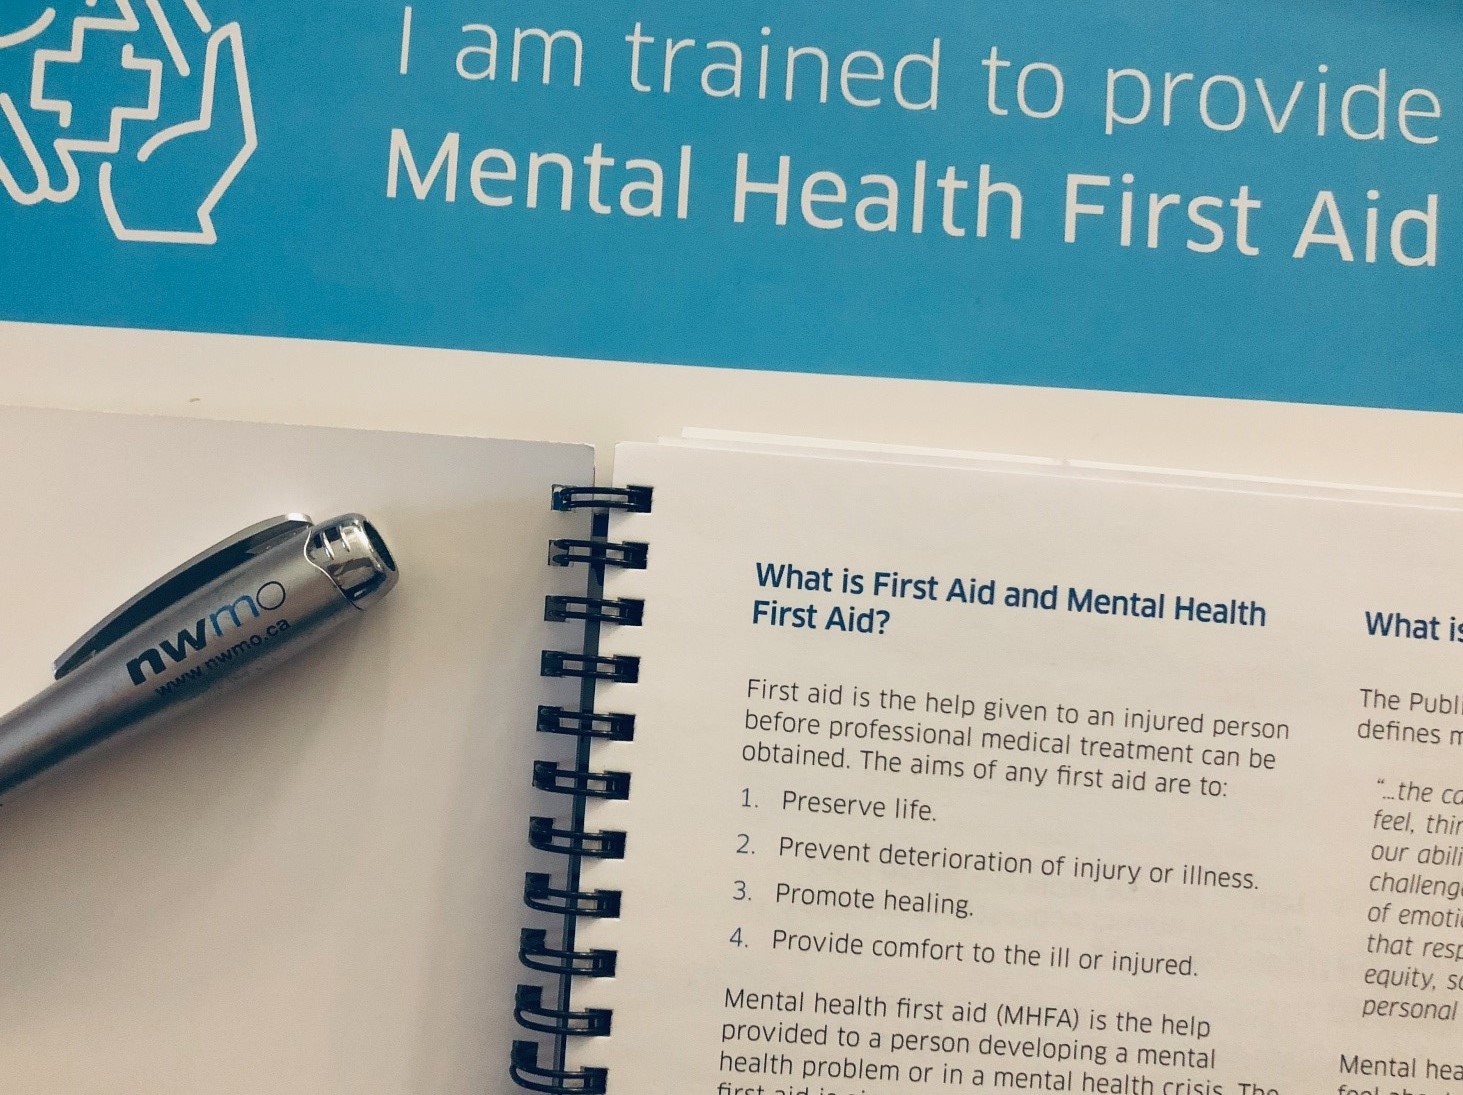 Residents of South Bruce recently took part in a Mental Health First Aid course offered by the Municipality of South Bruce in partnership with the NWMO.